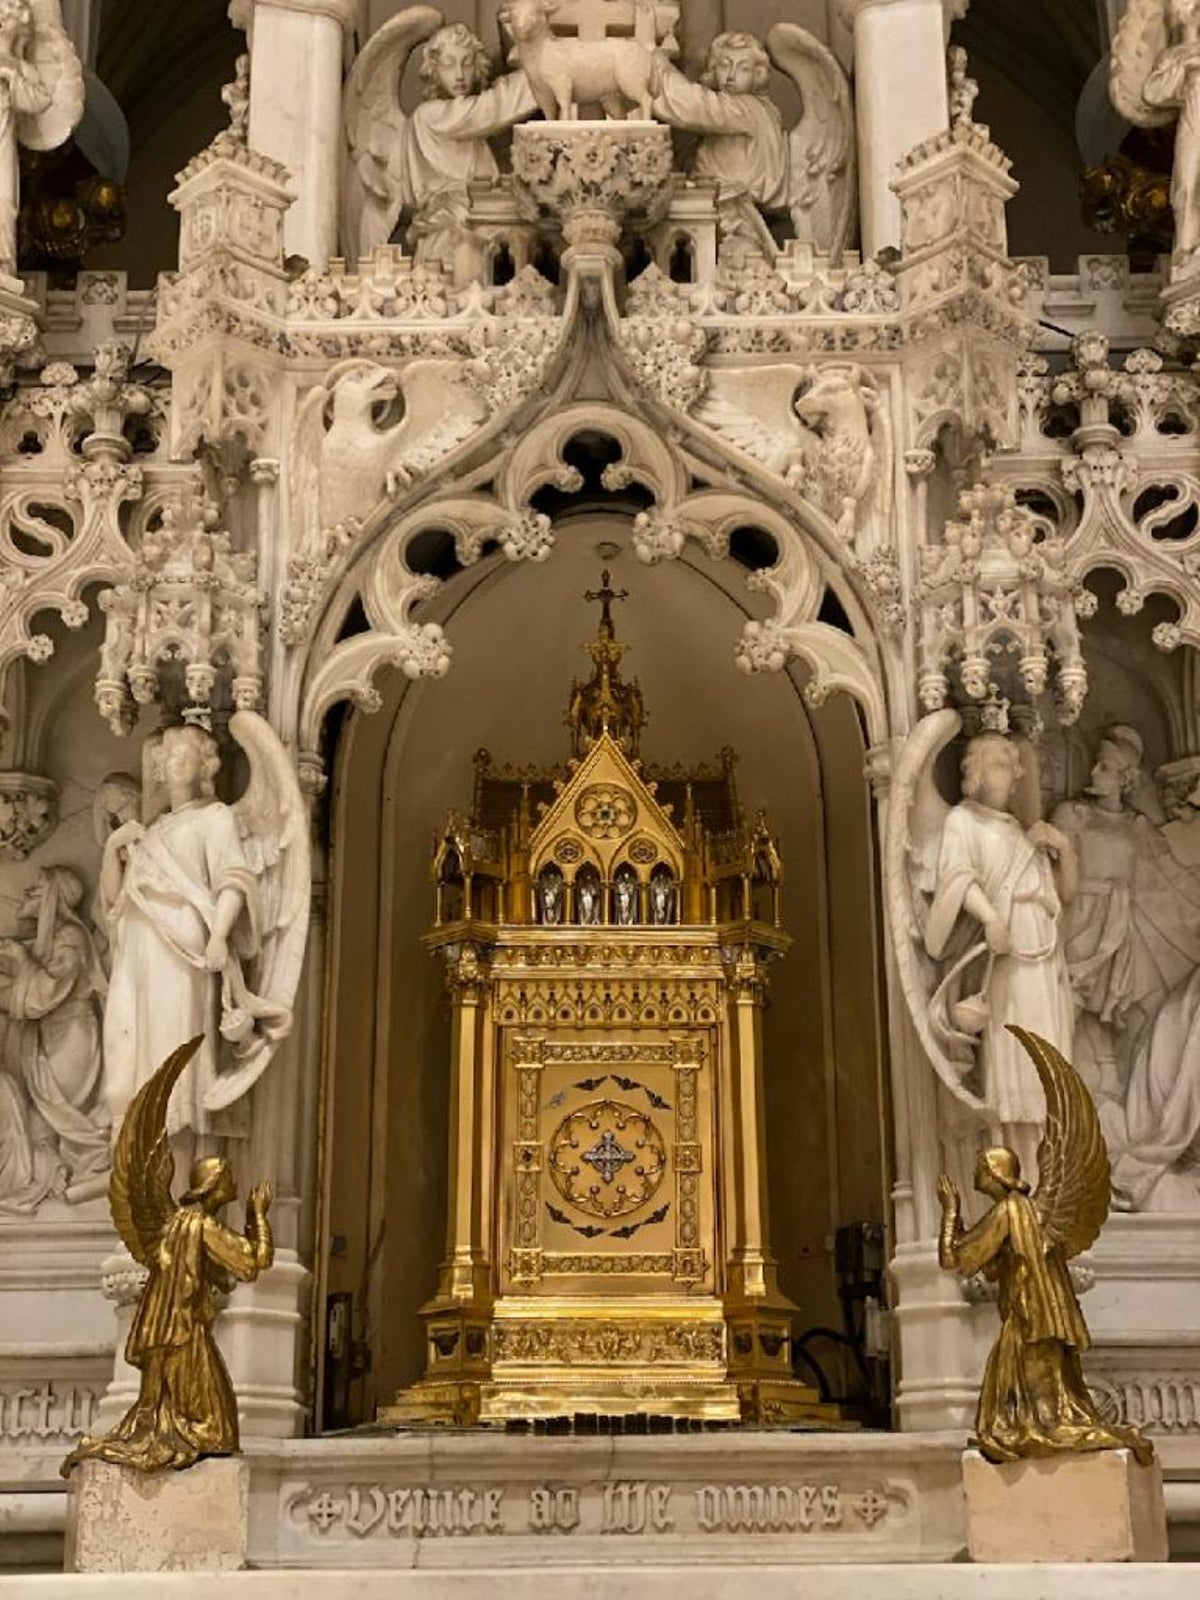 $2m tabernacle made of solid gold is stolen from Brooklyn church